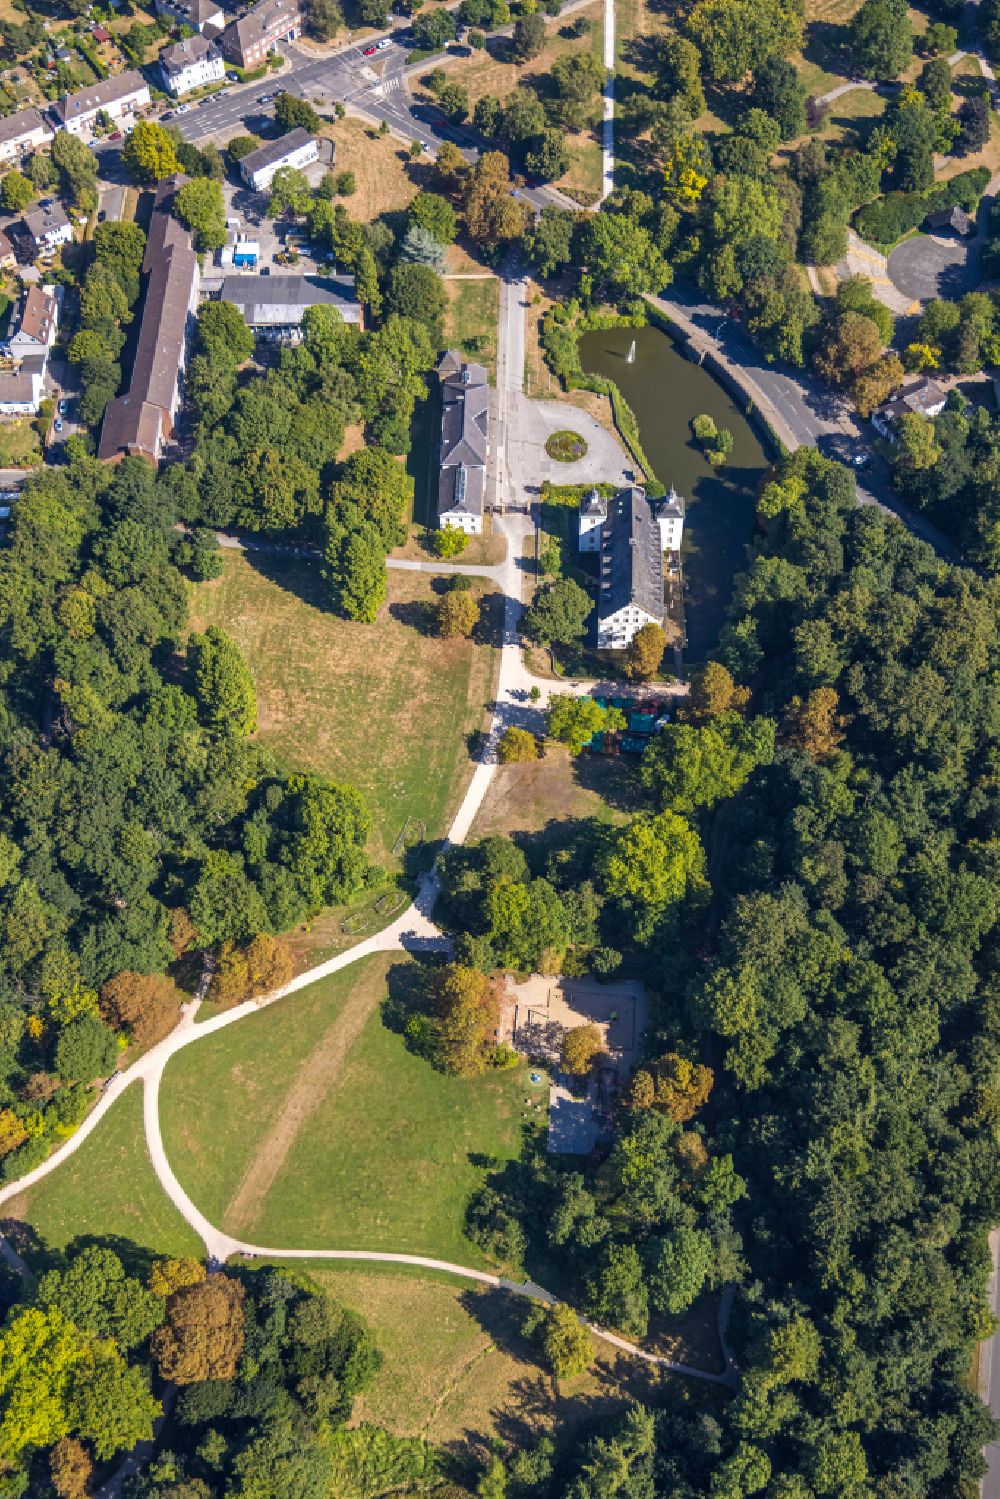 Aerial image Essen - Building complex in the park of the castle Borbeck in Essen in the state North Rhine-Westphalia, Germany